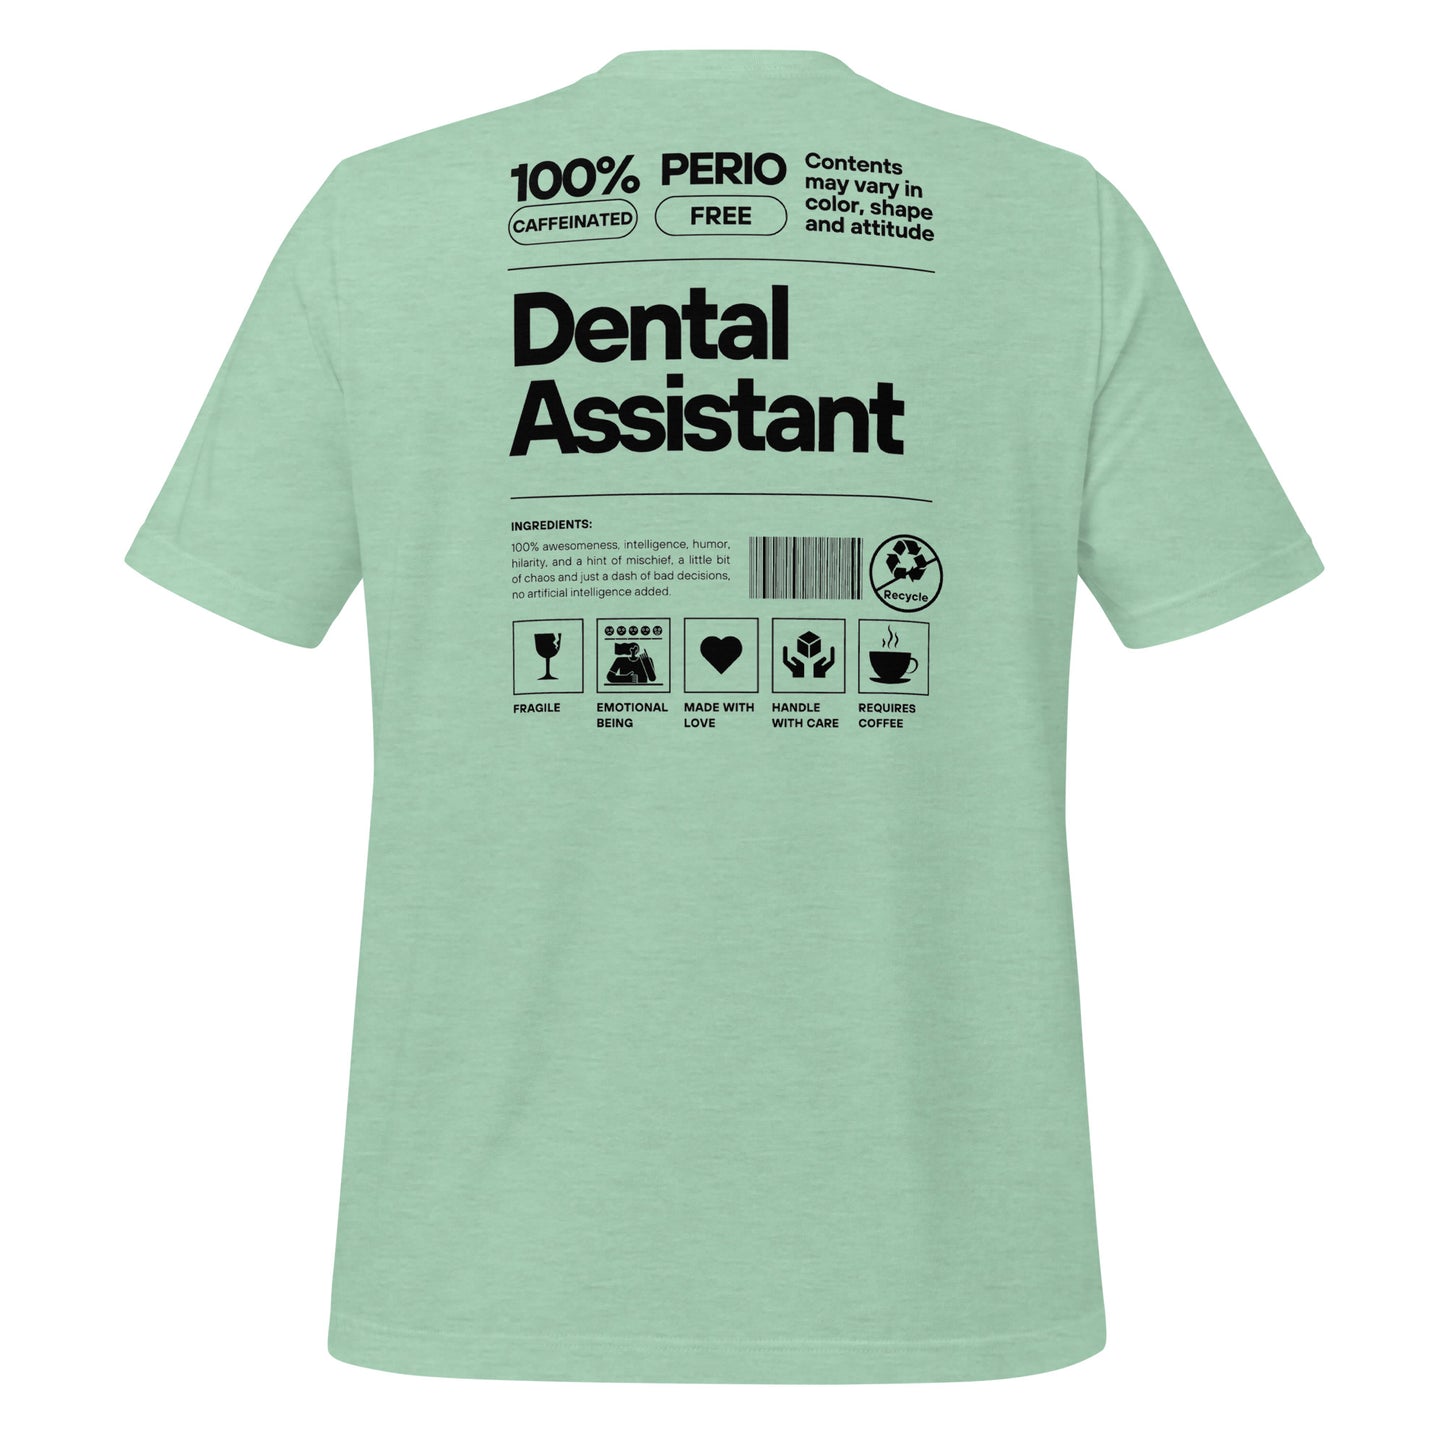 Heather prism mint dental assistant shirt featuring a creative label design with icons and text, perfect for dental assistants who want to express their identity and passion for their job - dental shirts back view.